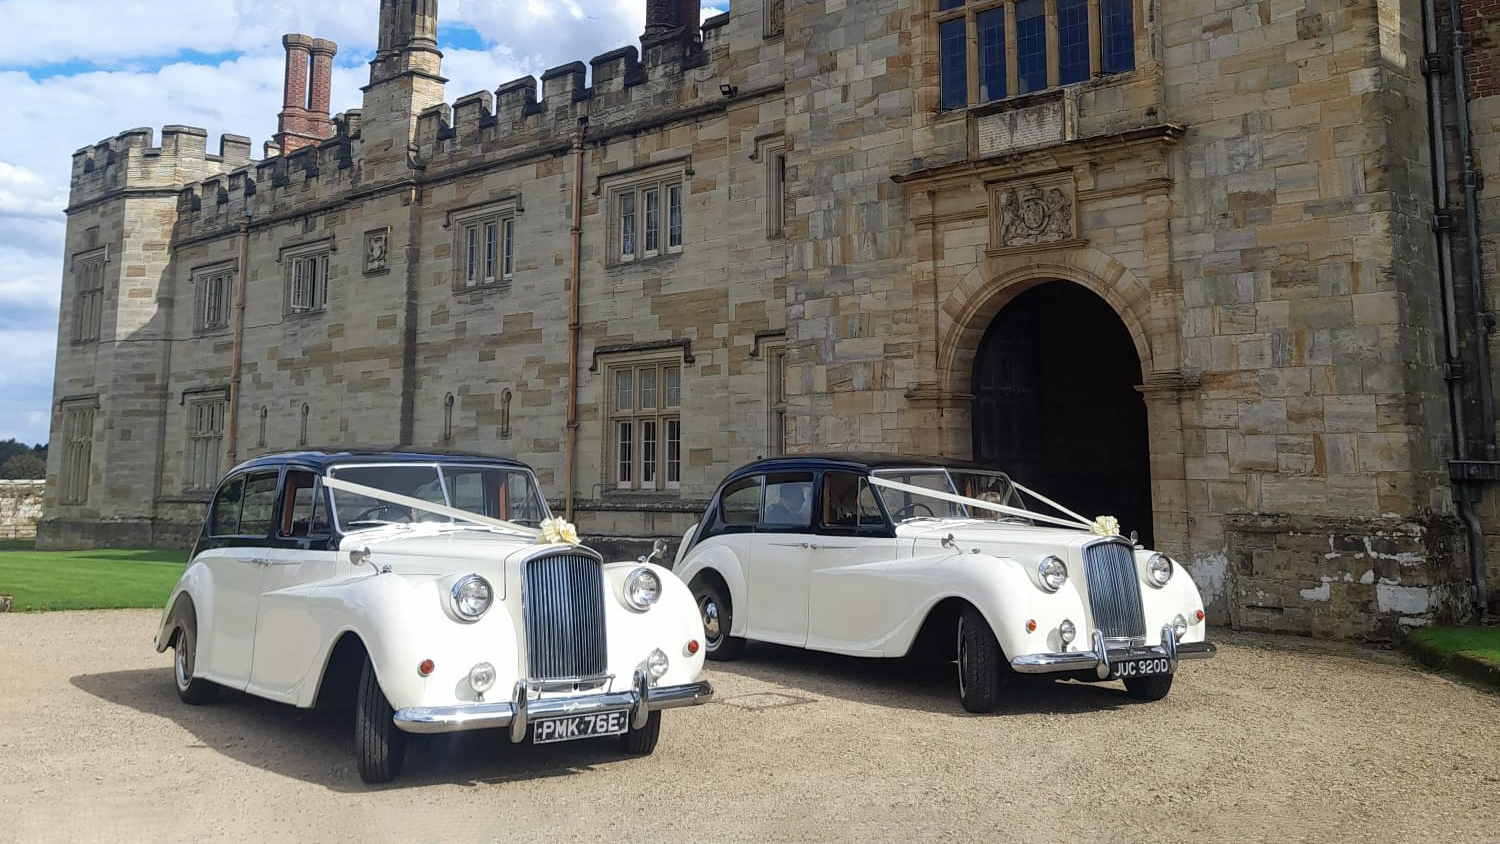 Two Classic Austin Princess Limousine decorated with Ivory Ribbons and Bows on top of the front grill. Vehicles are parked in front of a large manor house in Wye